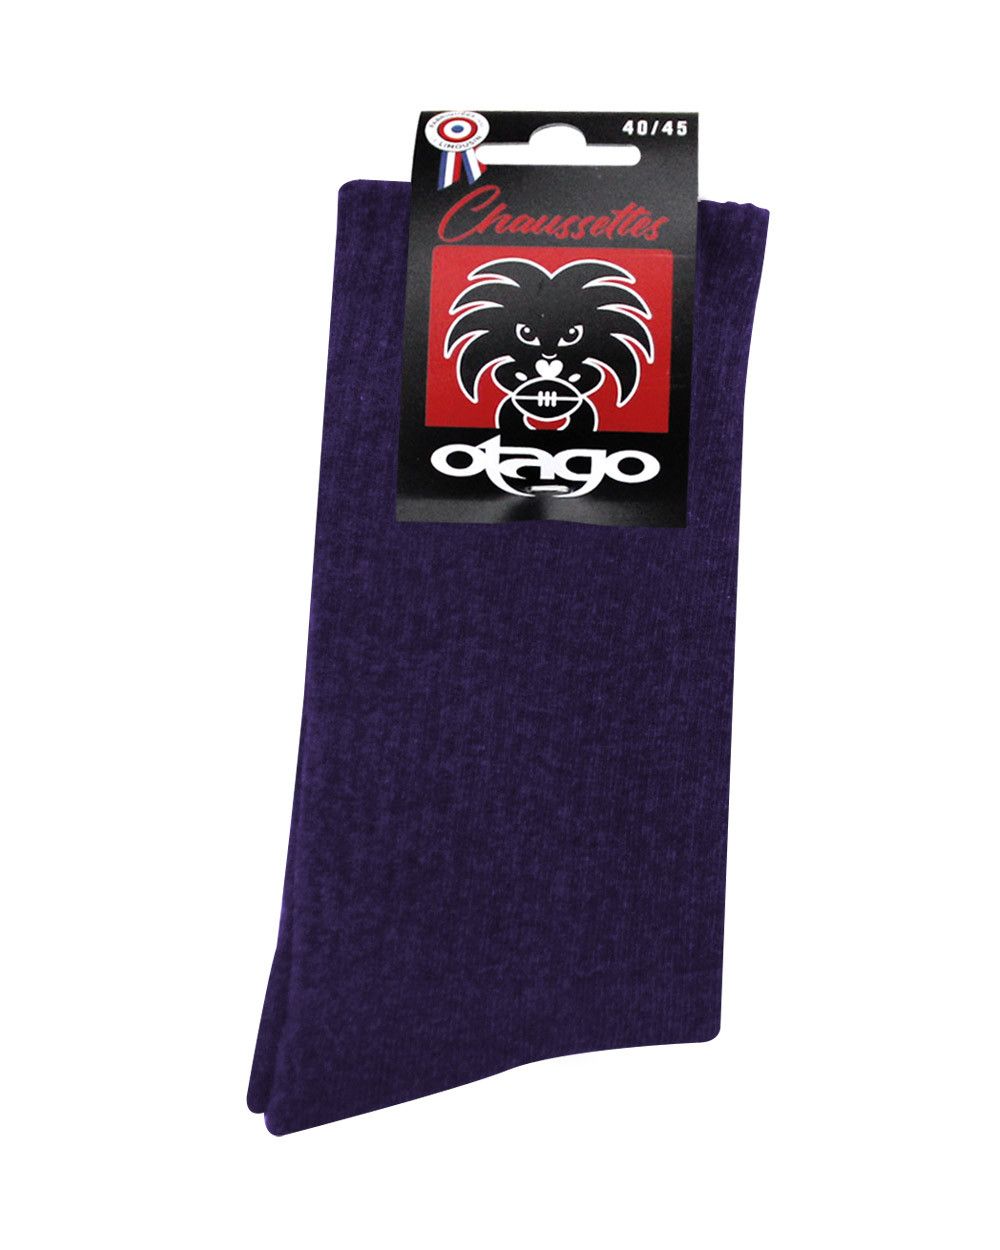 Chaussettes Otago rugby violet homme